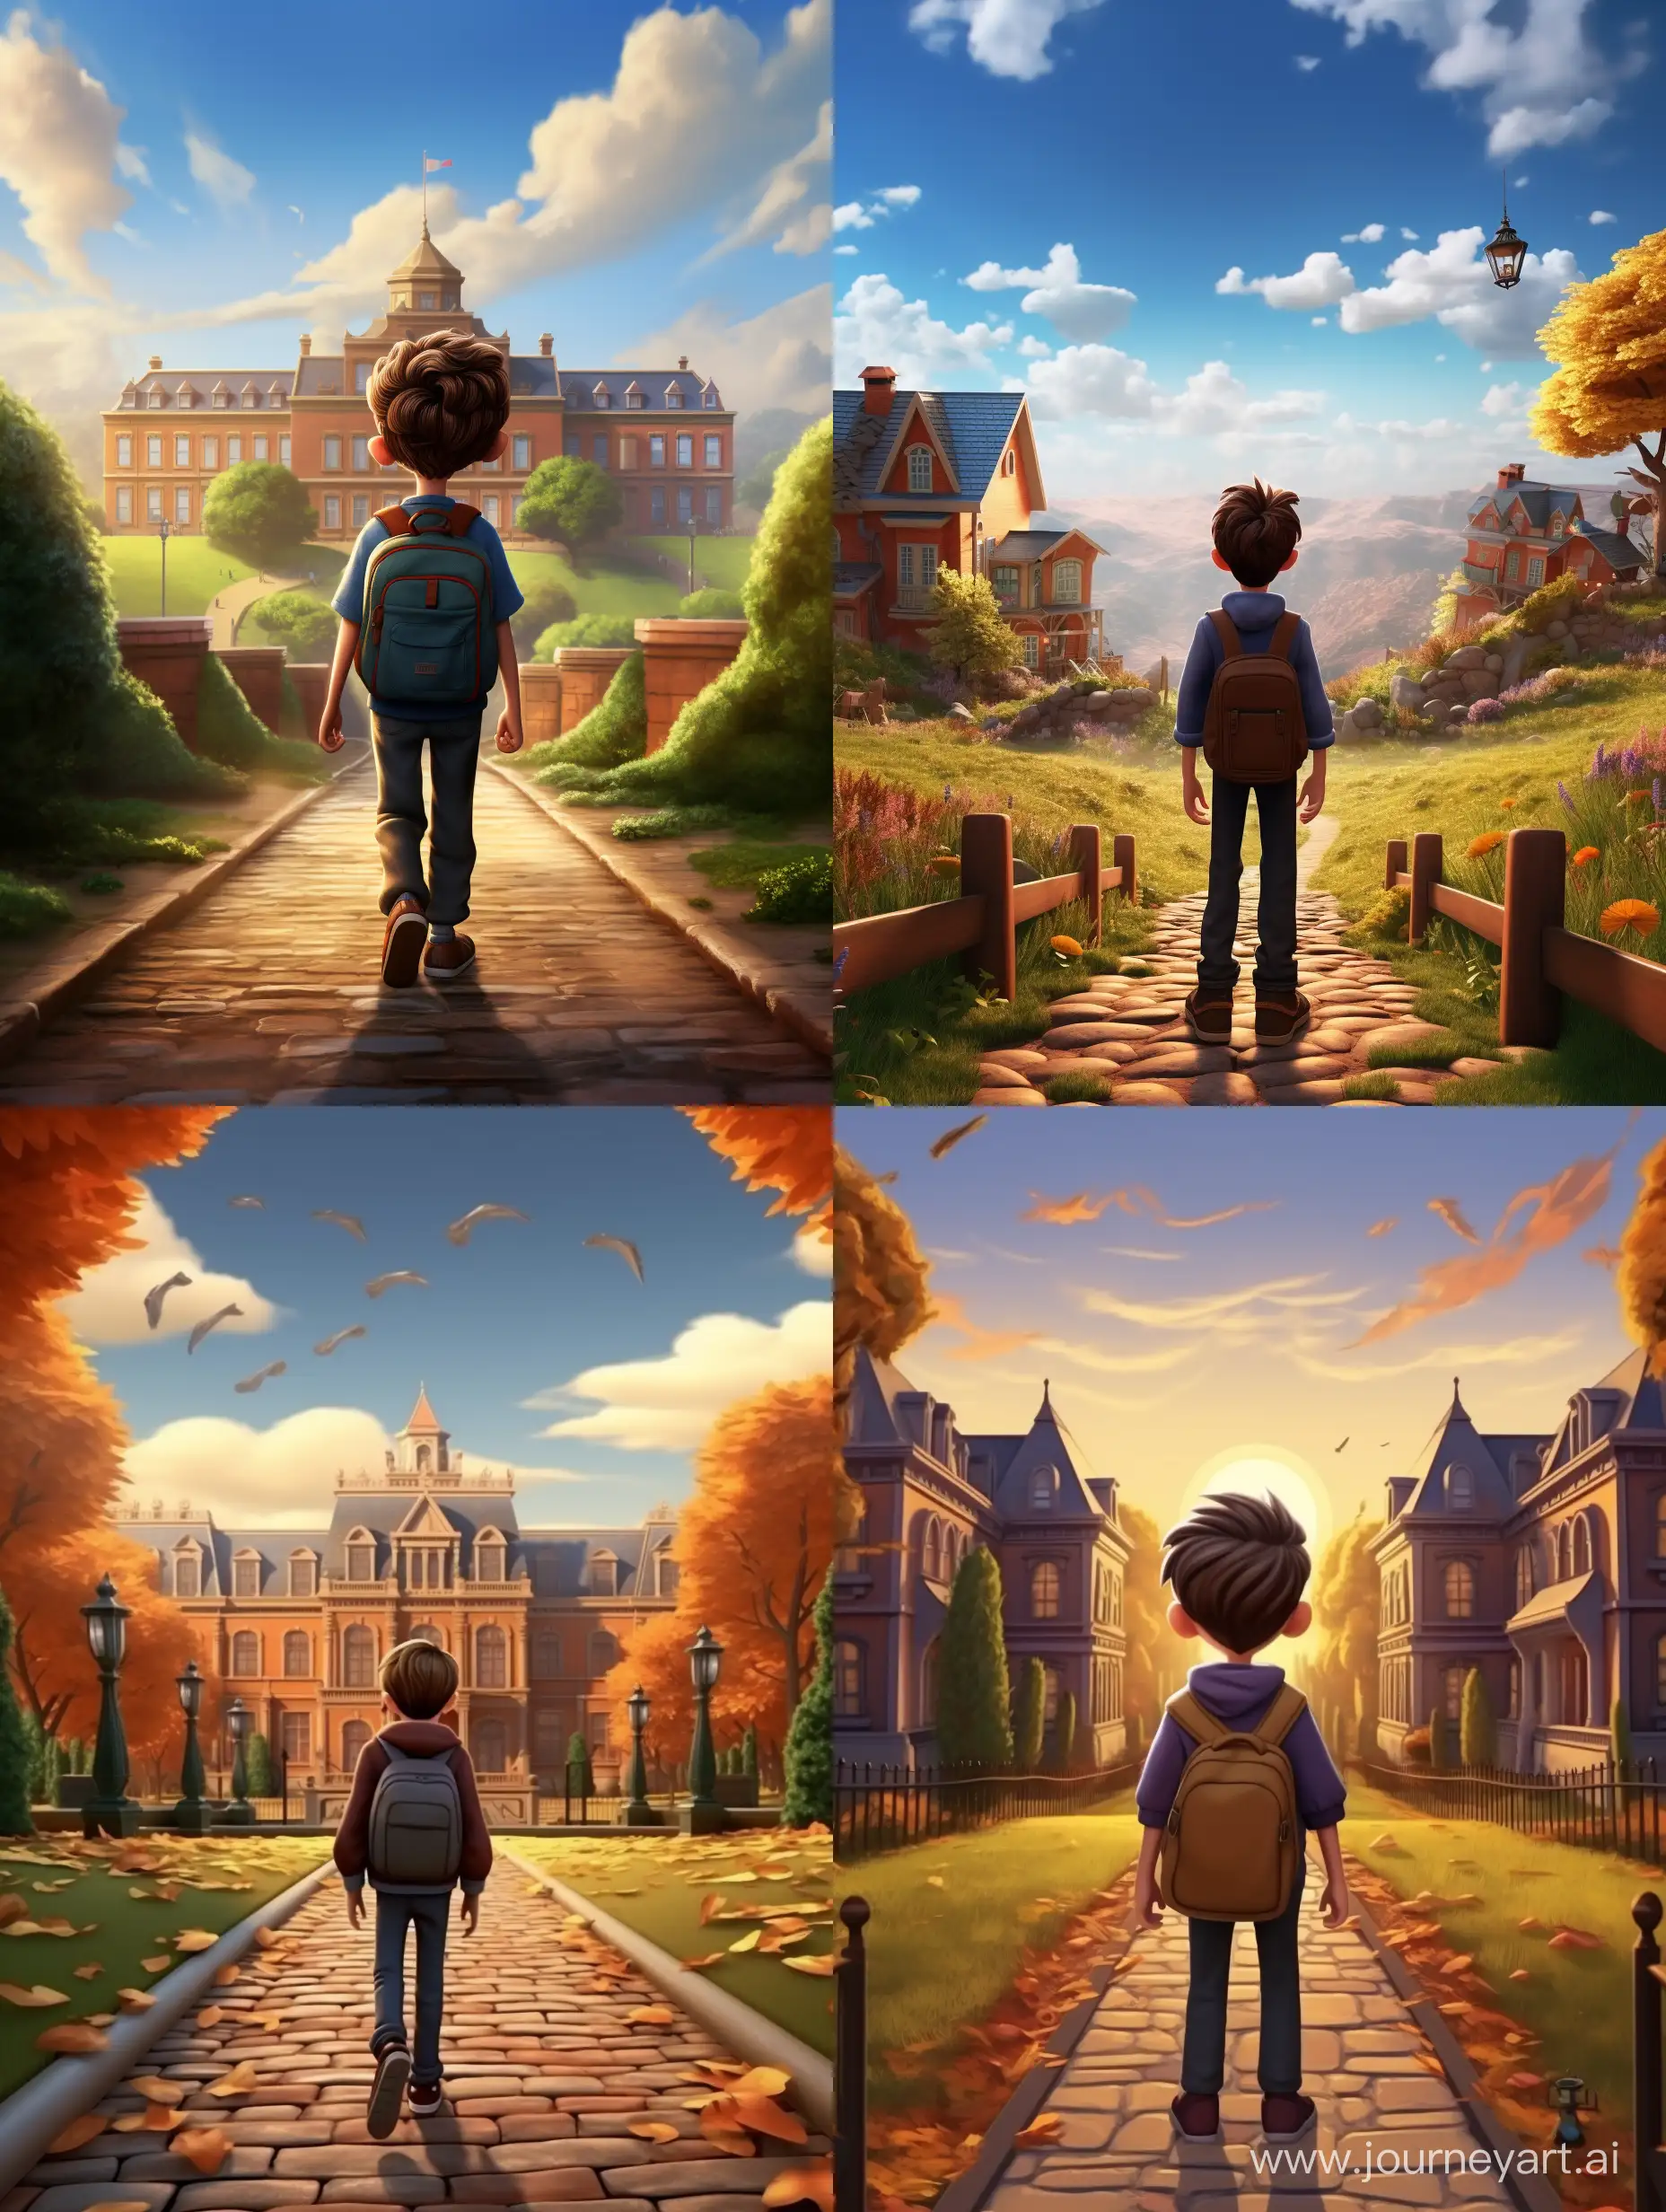 The boy is walking along the path. There is a school in the background Pixar Style, 3d animation Style